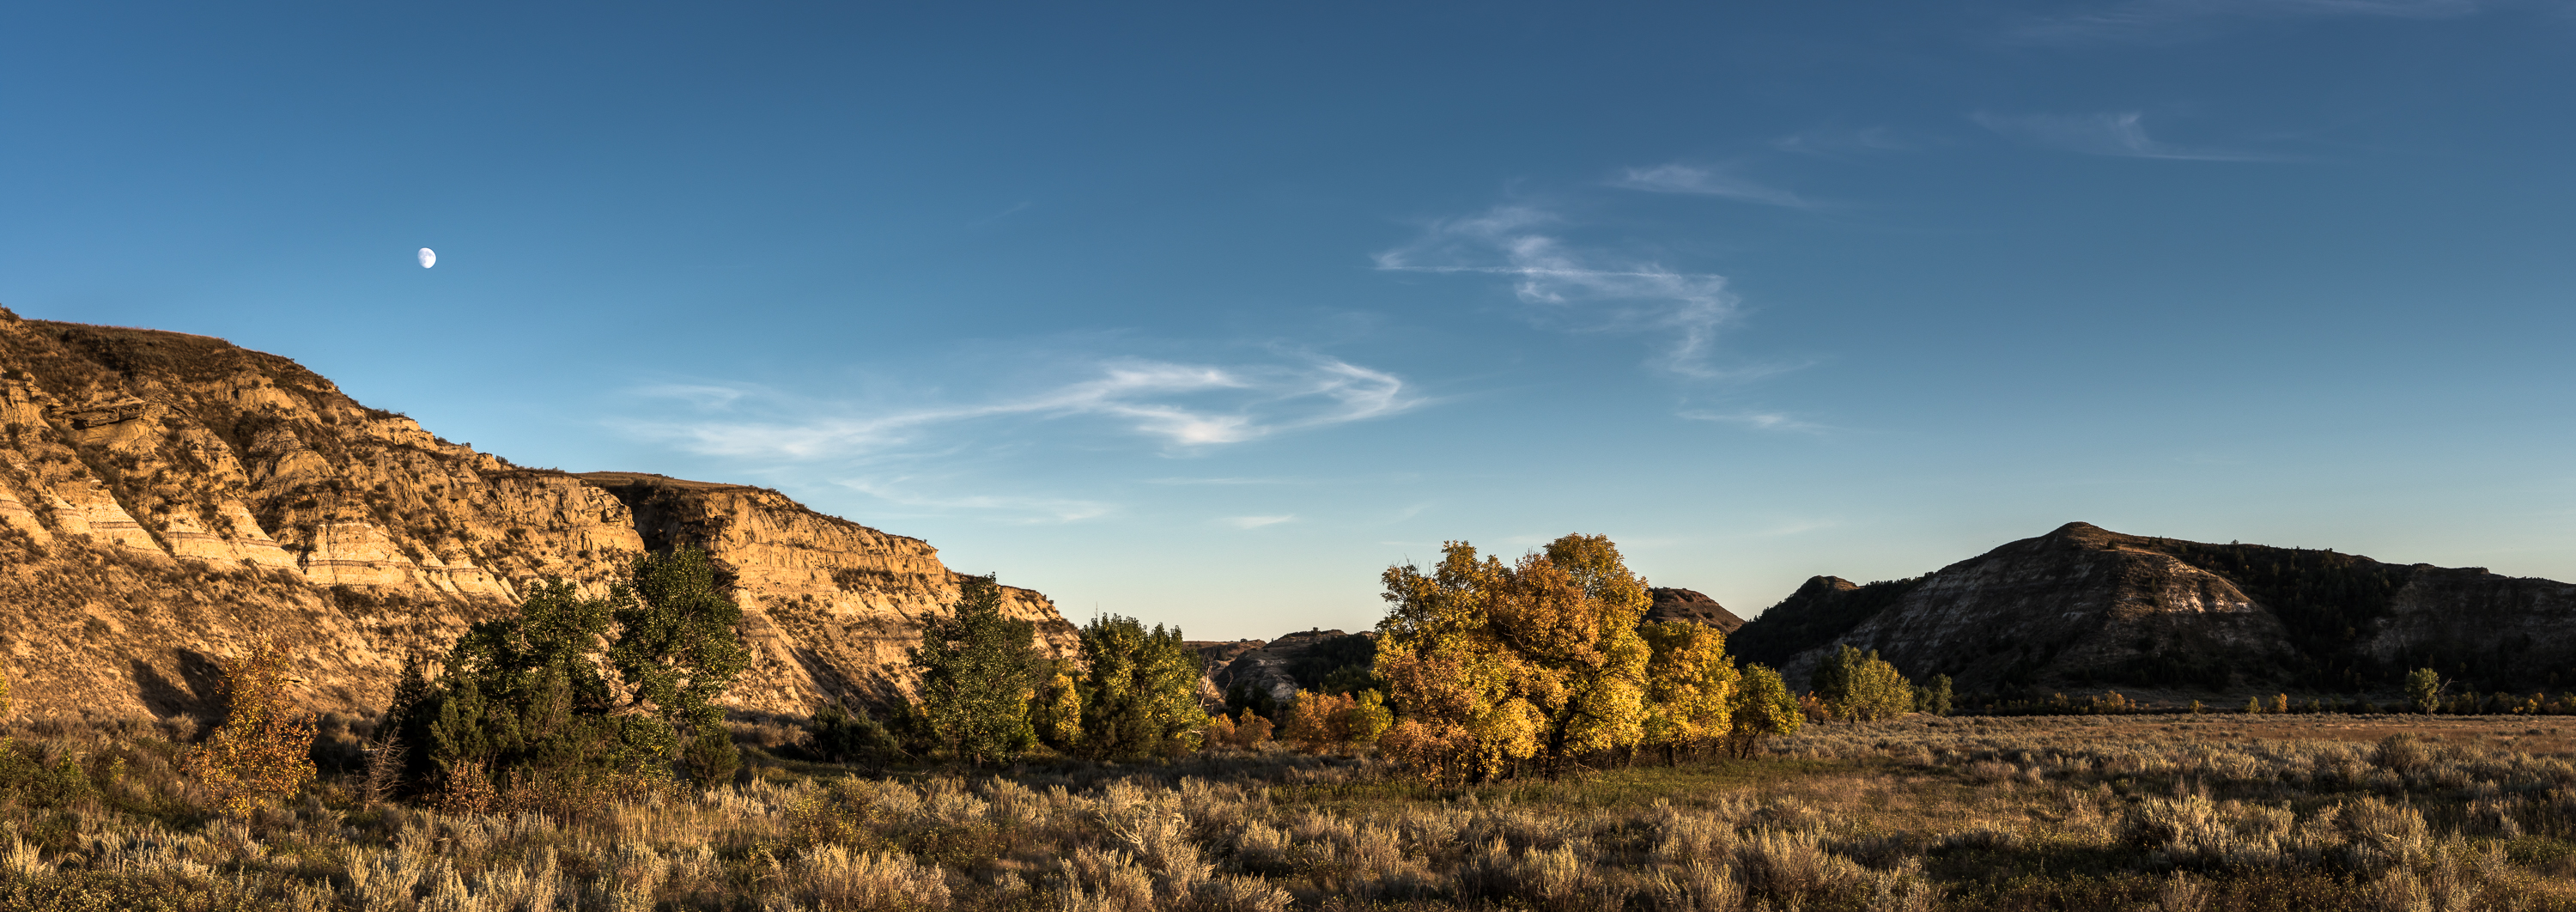 At once bathed in a golden glow and receded into shadow, the sweeping vistas of Theodore Roosevelt National Park are rich in depth. Photo: Sivani Babu.